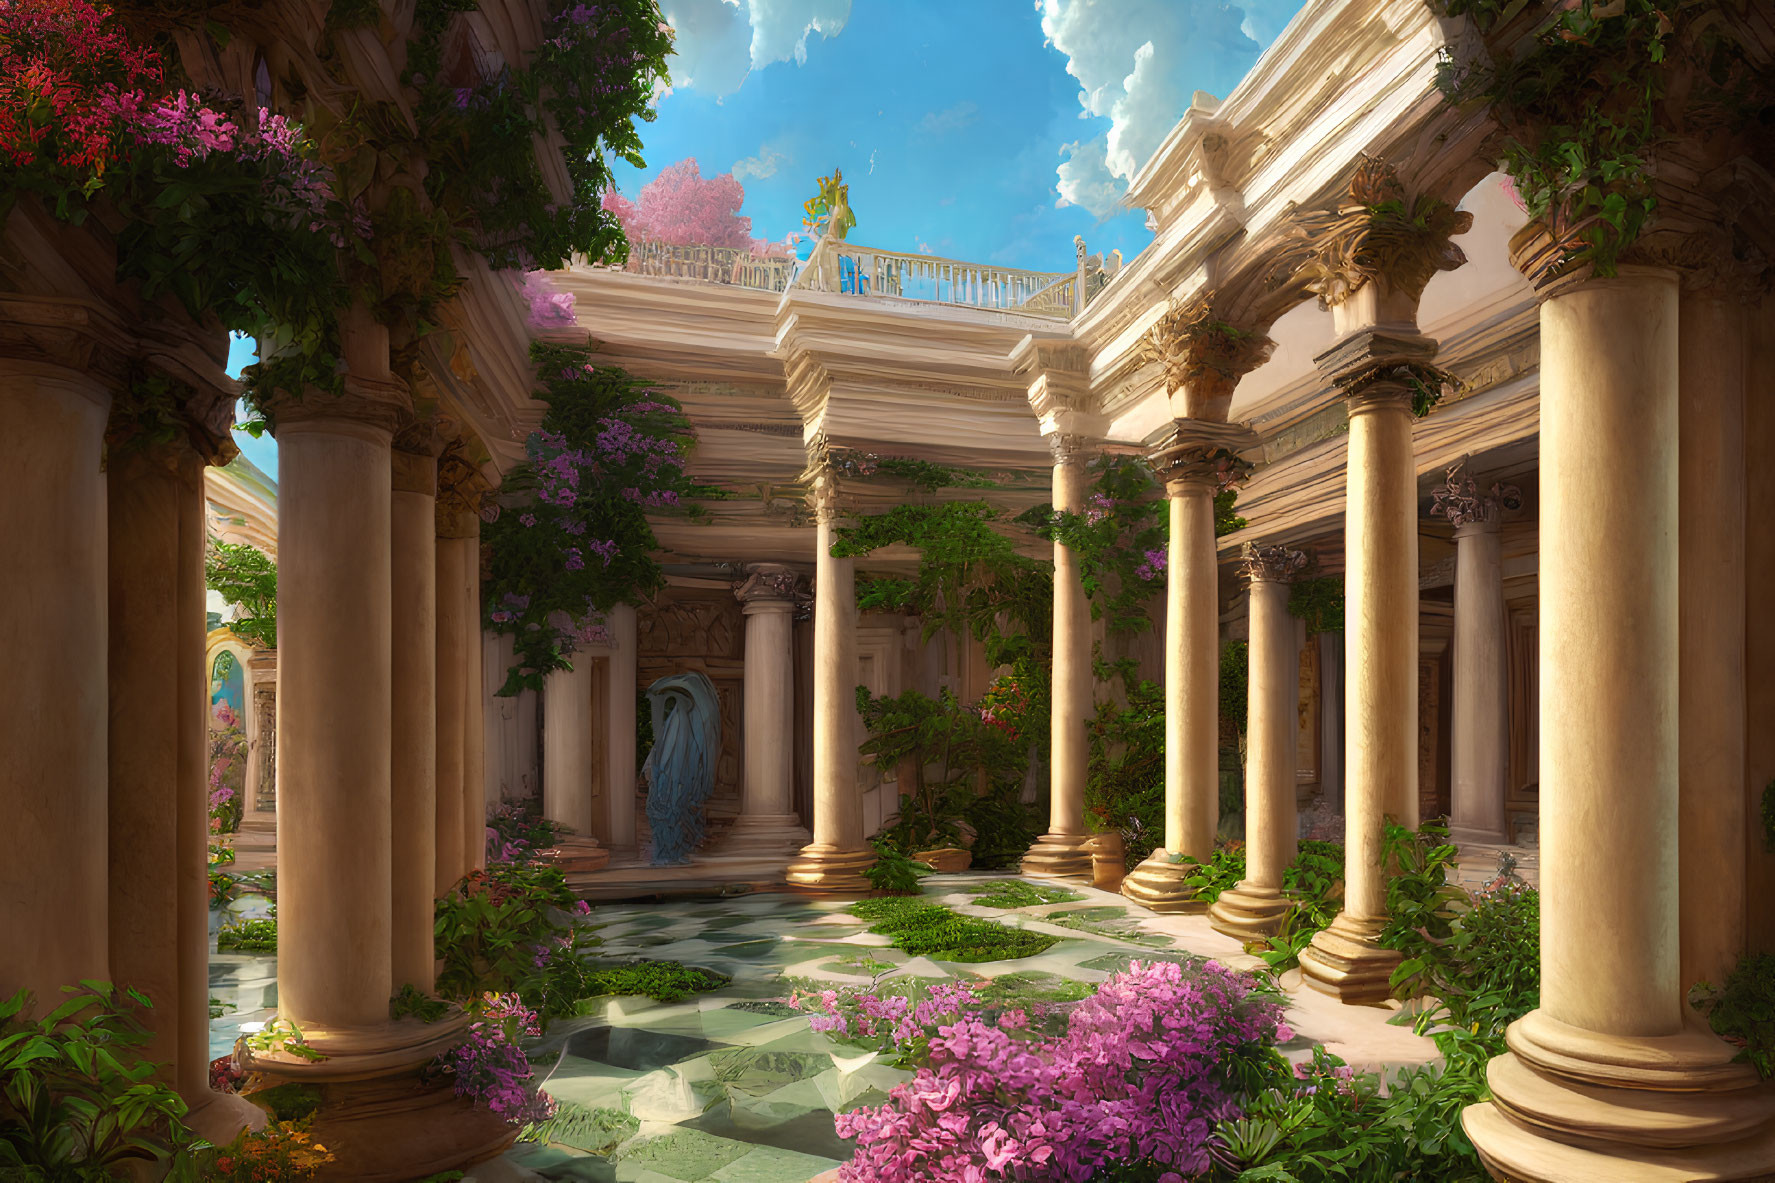 Classical courtyard with marble pillars, lush plants, statue, vibrant sky